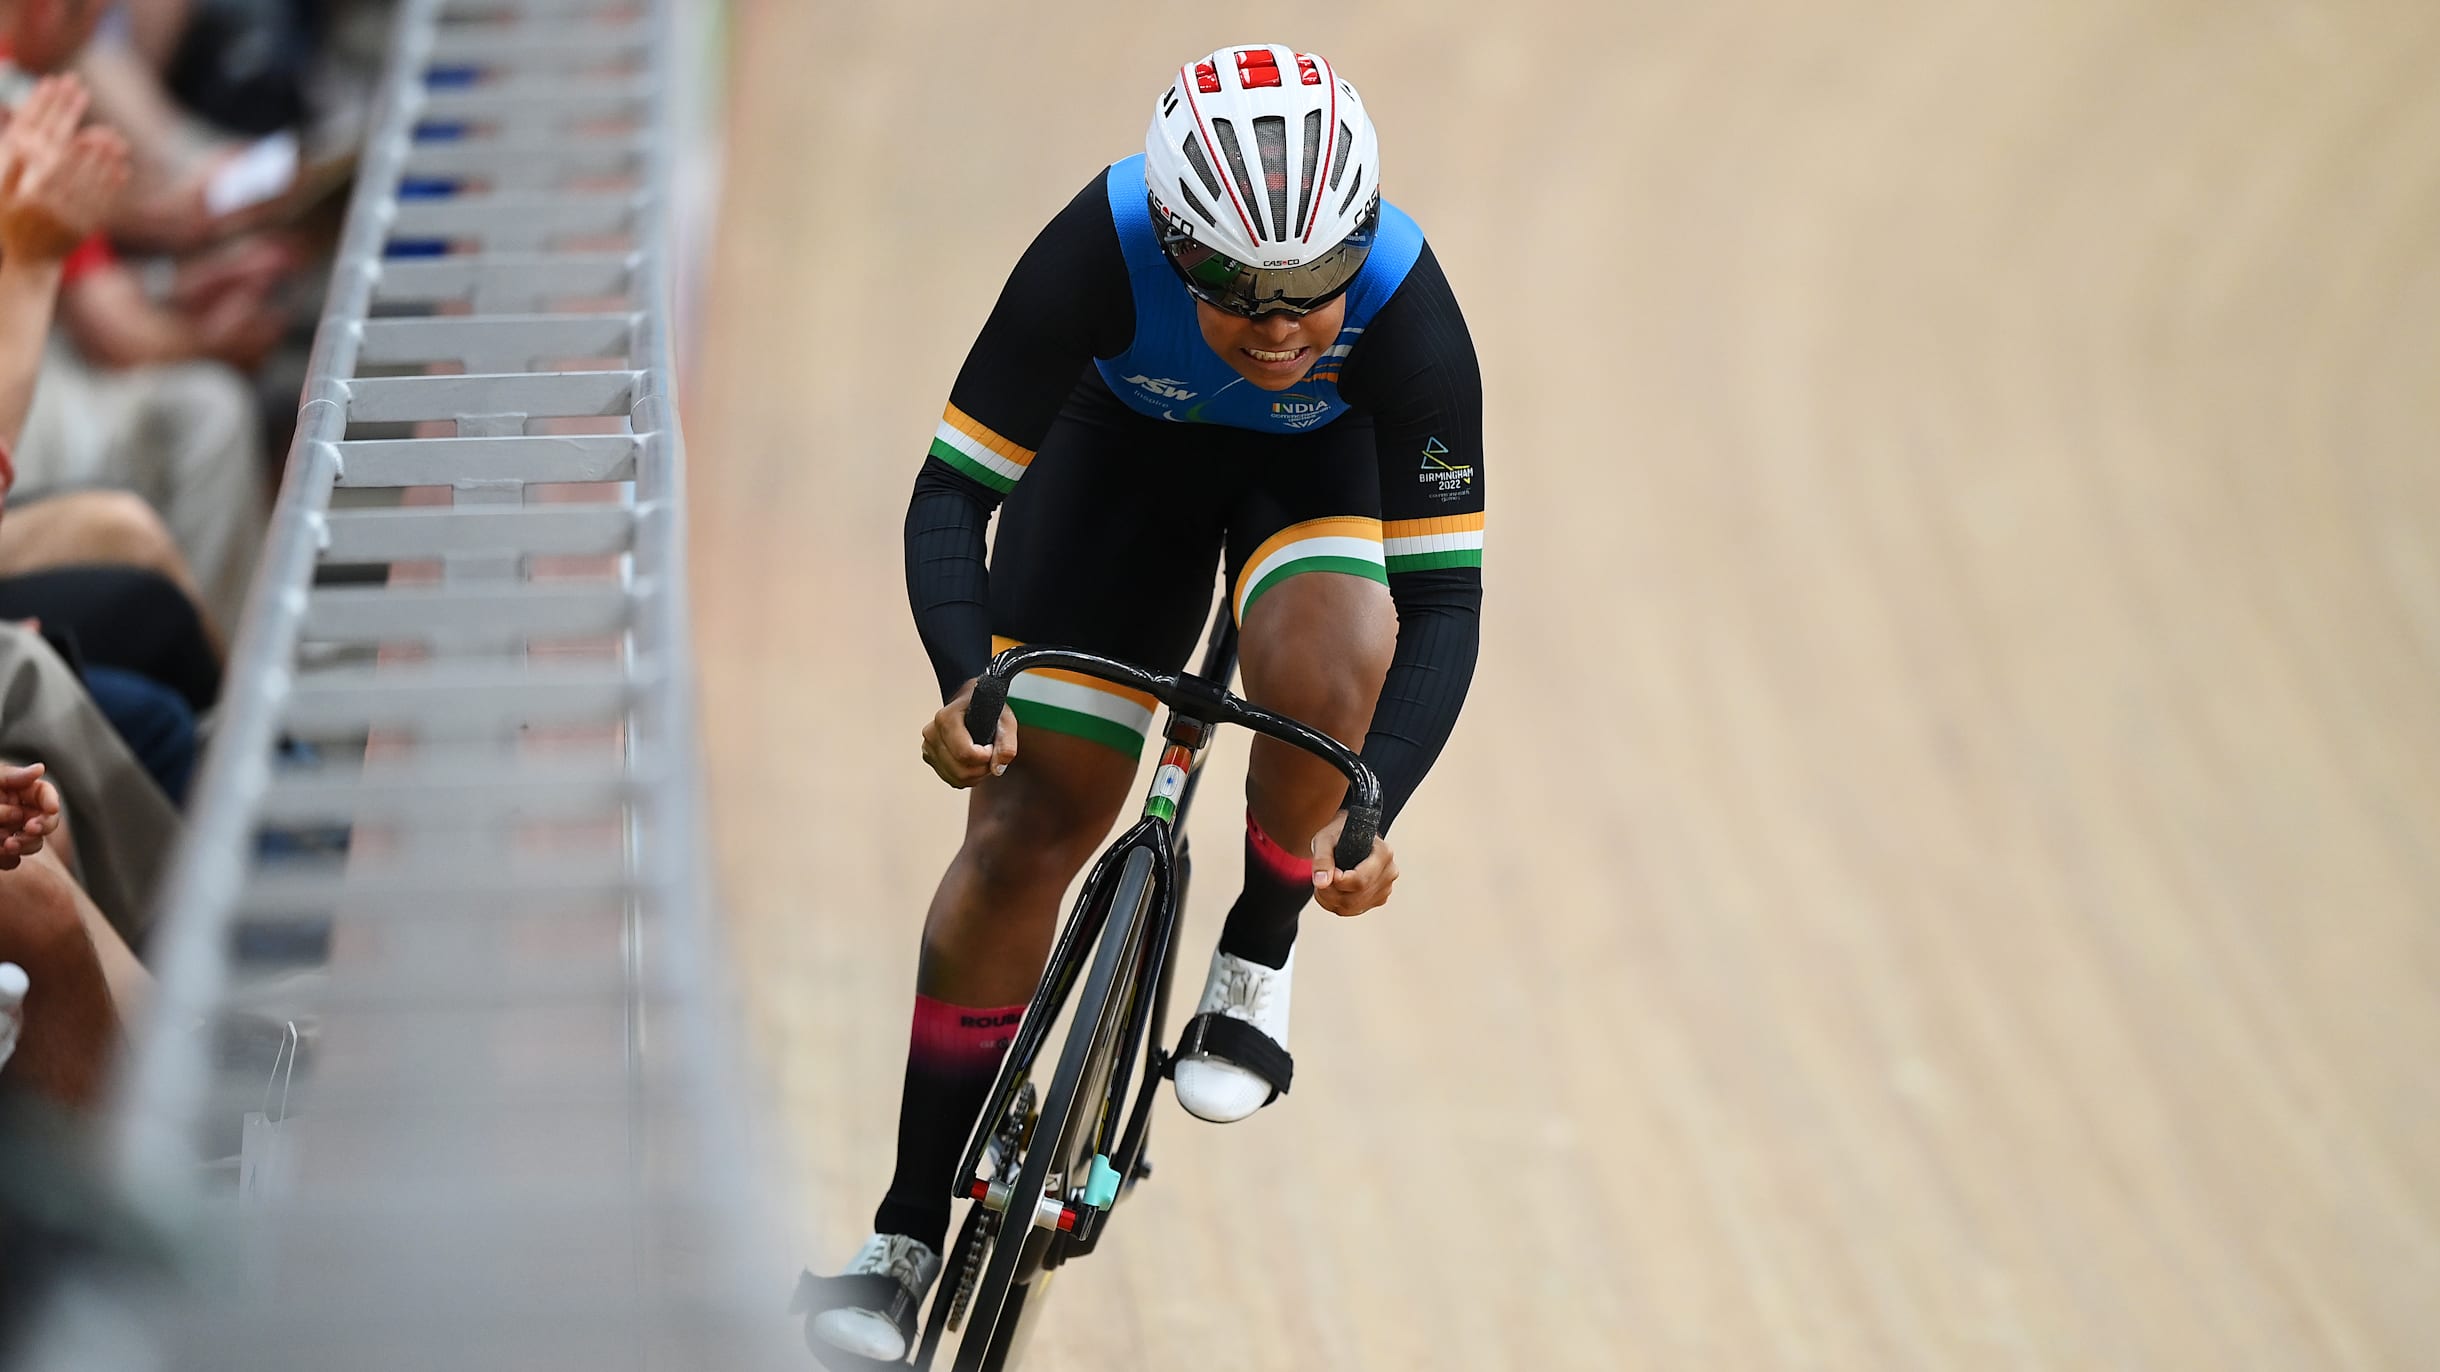 Cycling at Commonwealth Games 2022 E David Beckham out in keirin first round